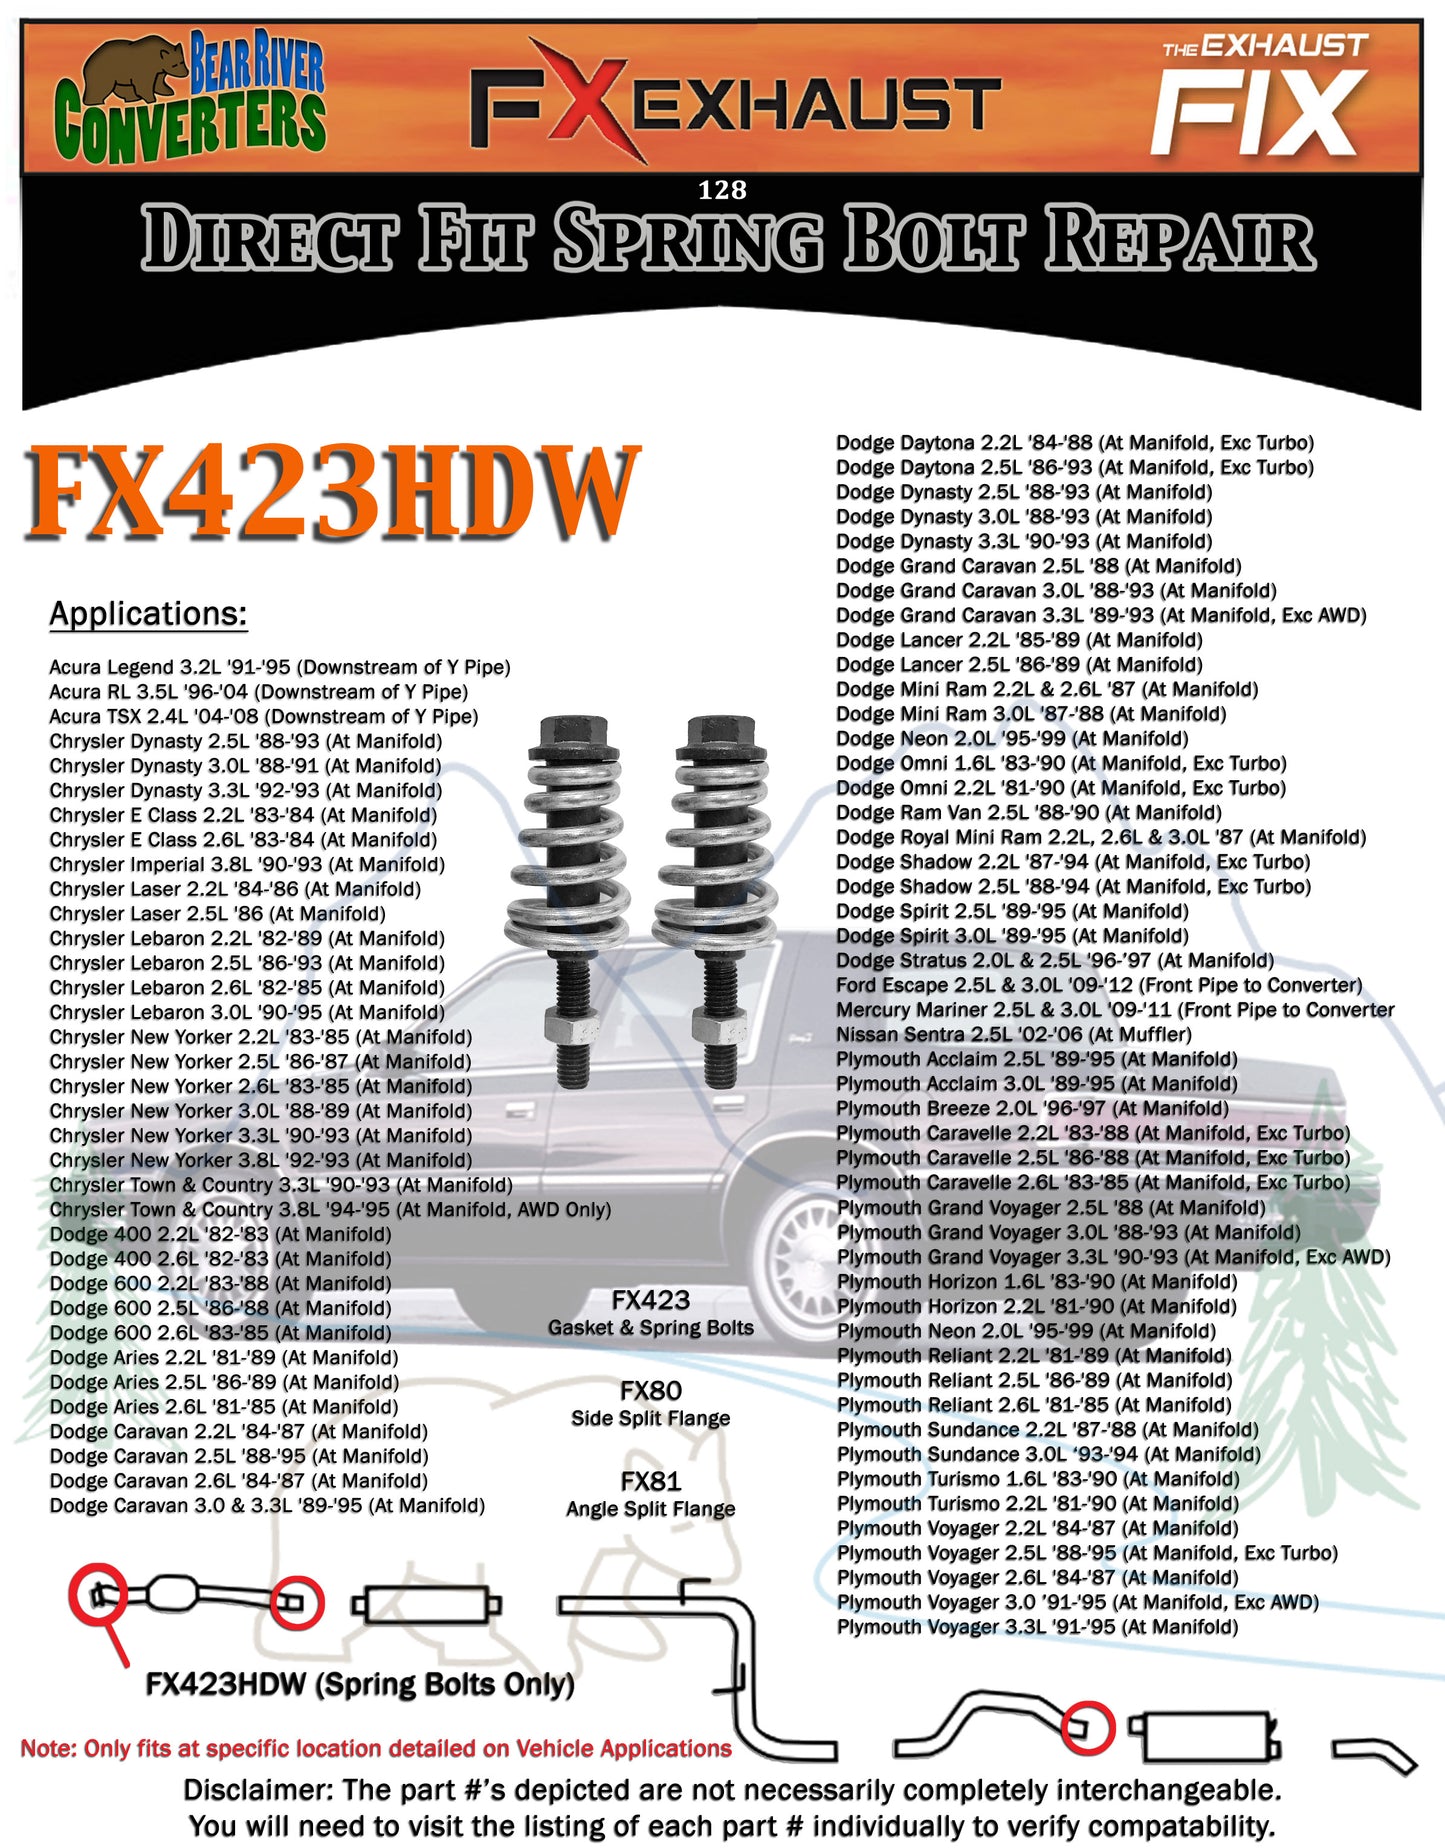 FX423HDW Exhaust Spring Bolt Stud & Nut Hardware Repair Replacement Kit